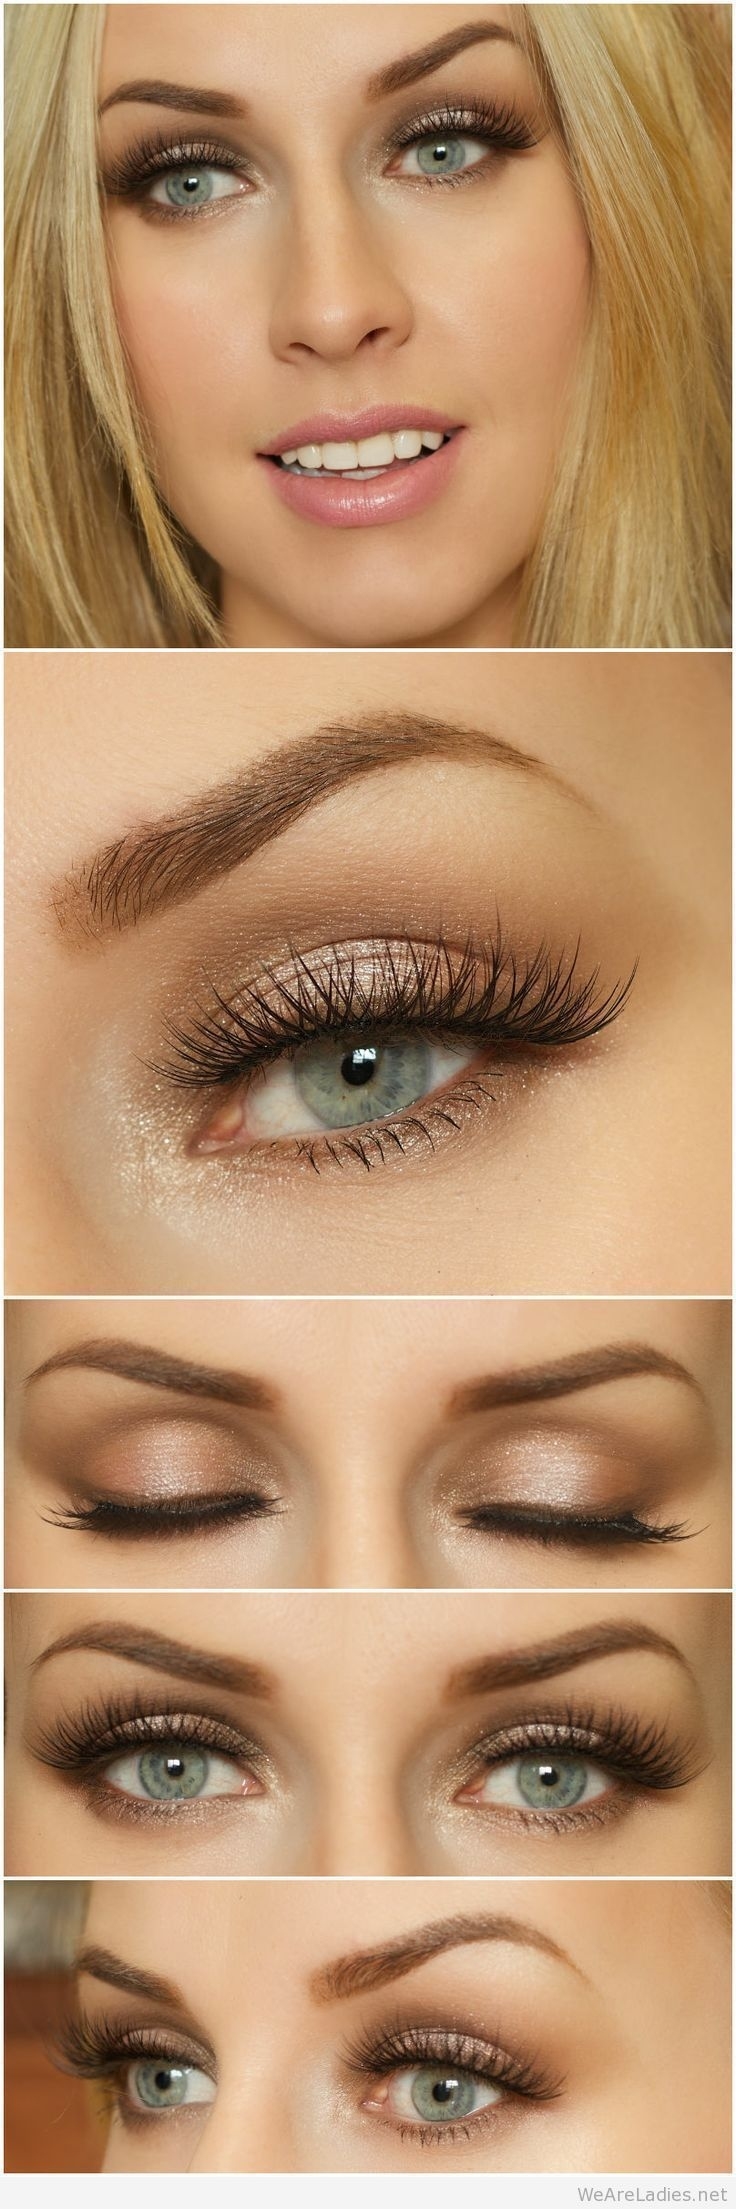 eye makeup tips for blue eyes and blonde hair